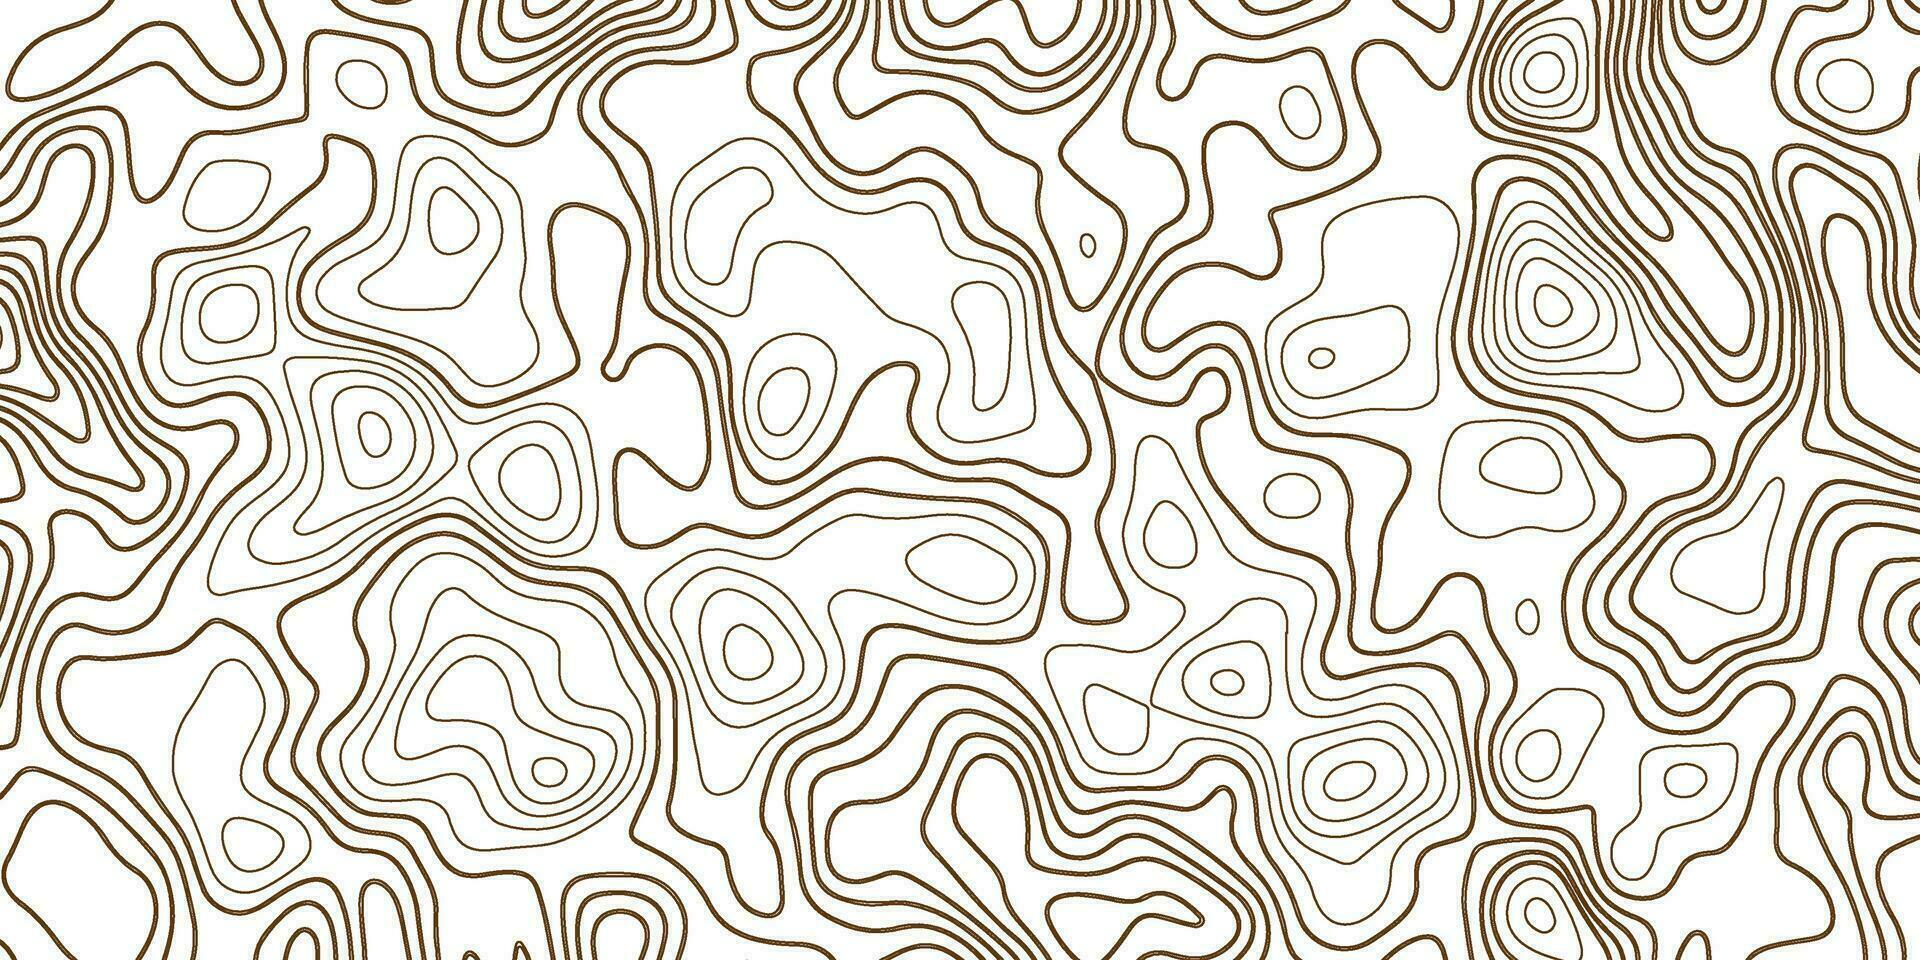 Topographic Map. Topography Background. Seamless Pattern of Lines and Curves in Brown and vector